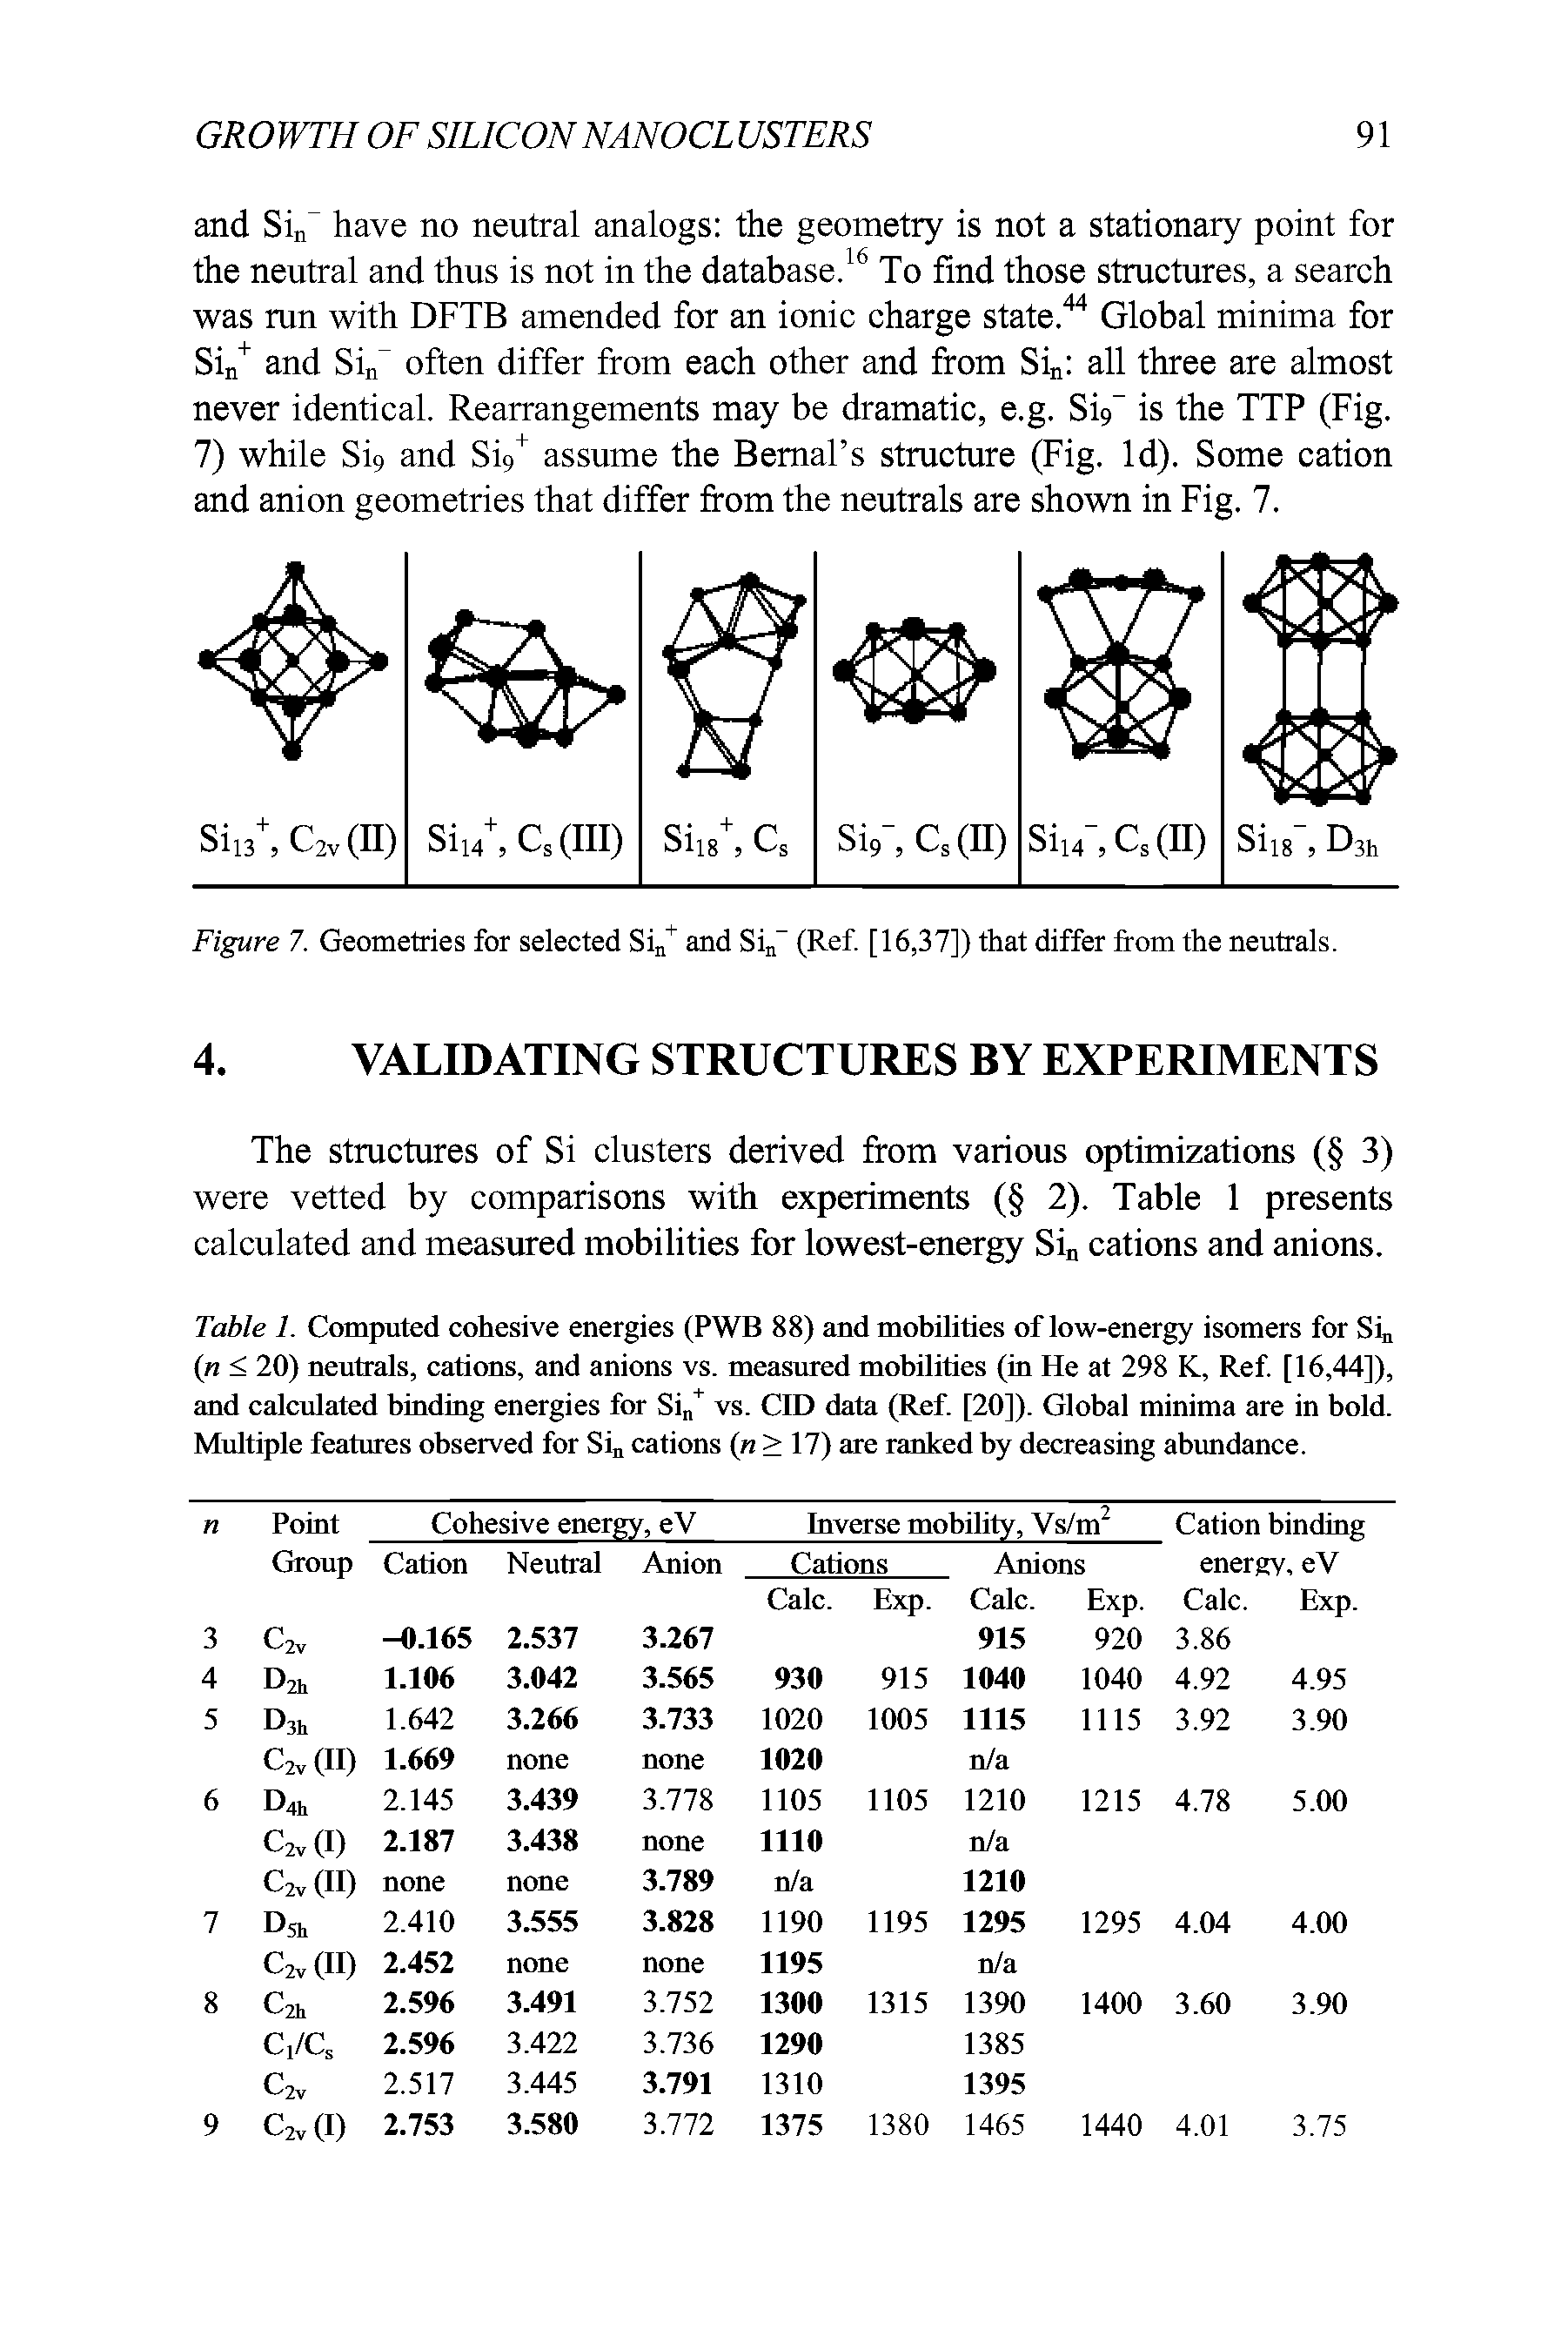 Table 1. Computed cohesive energies (PWB 88) and mobilities of low-energy isomers for Sin (n < 20) neutrals, cations, and anions vs. measured mobilities (in He at 298 K, Ref. [16,44]), and calculated binding energies for Si + vs. CID data (Ref. [20]). Global minima are in bold. Multiple features observed for Sin cations (n > 17) are ranked by decreasing abundance.